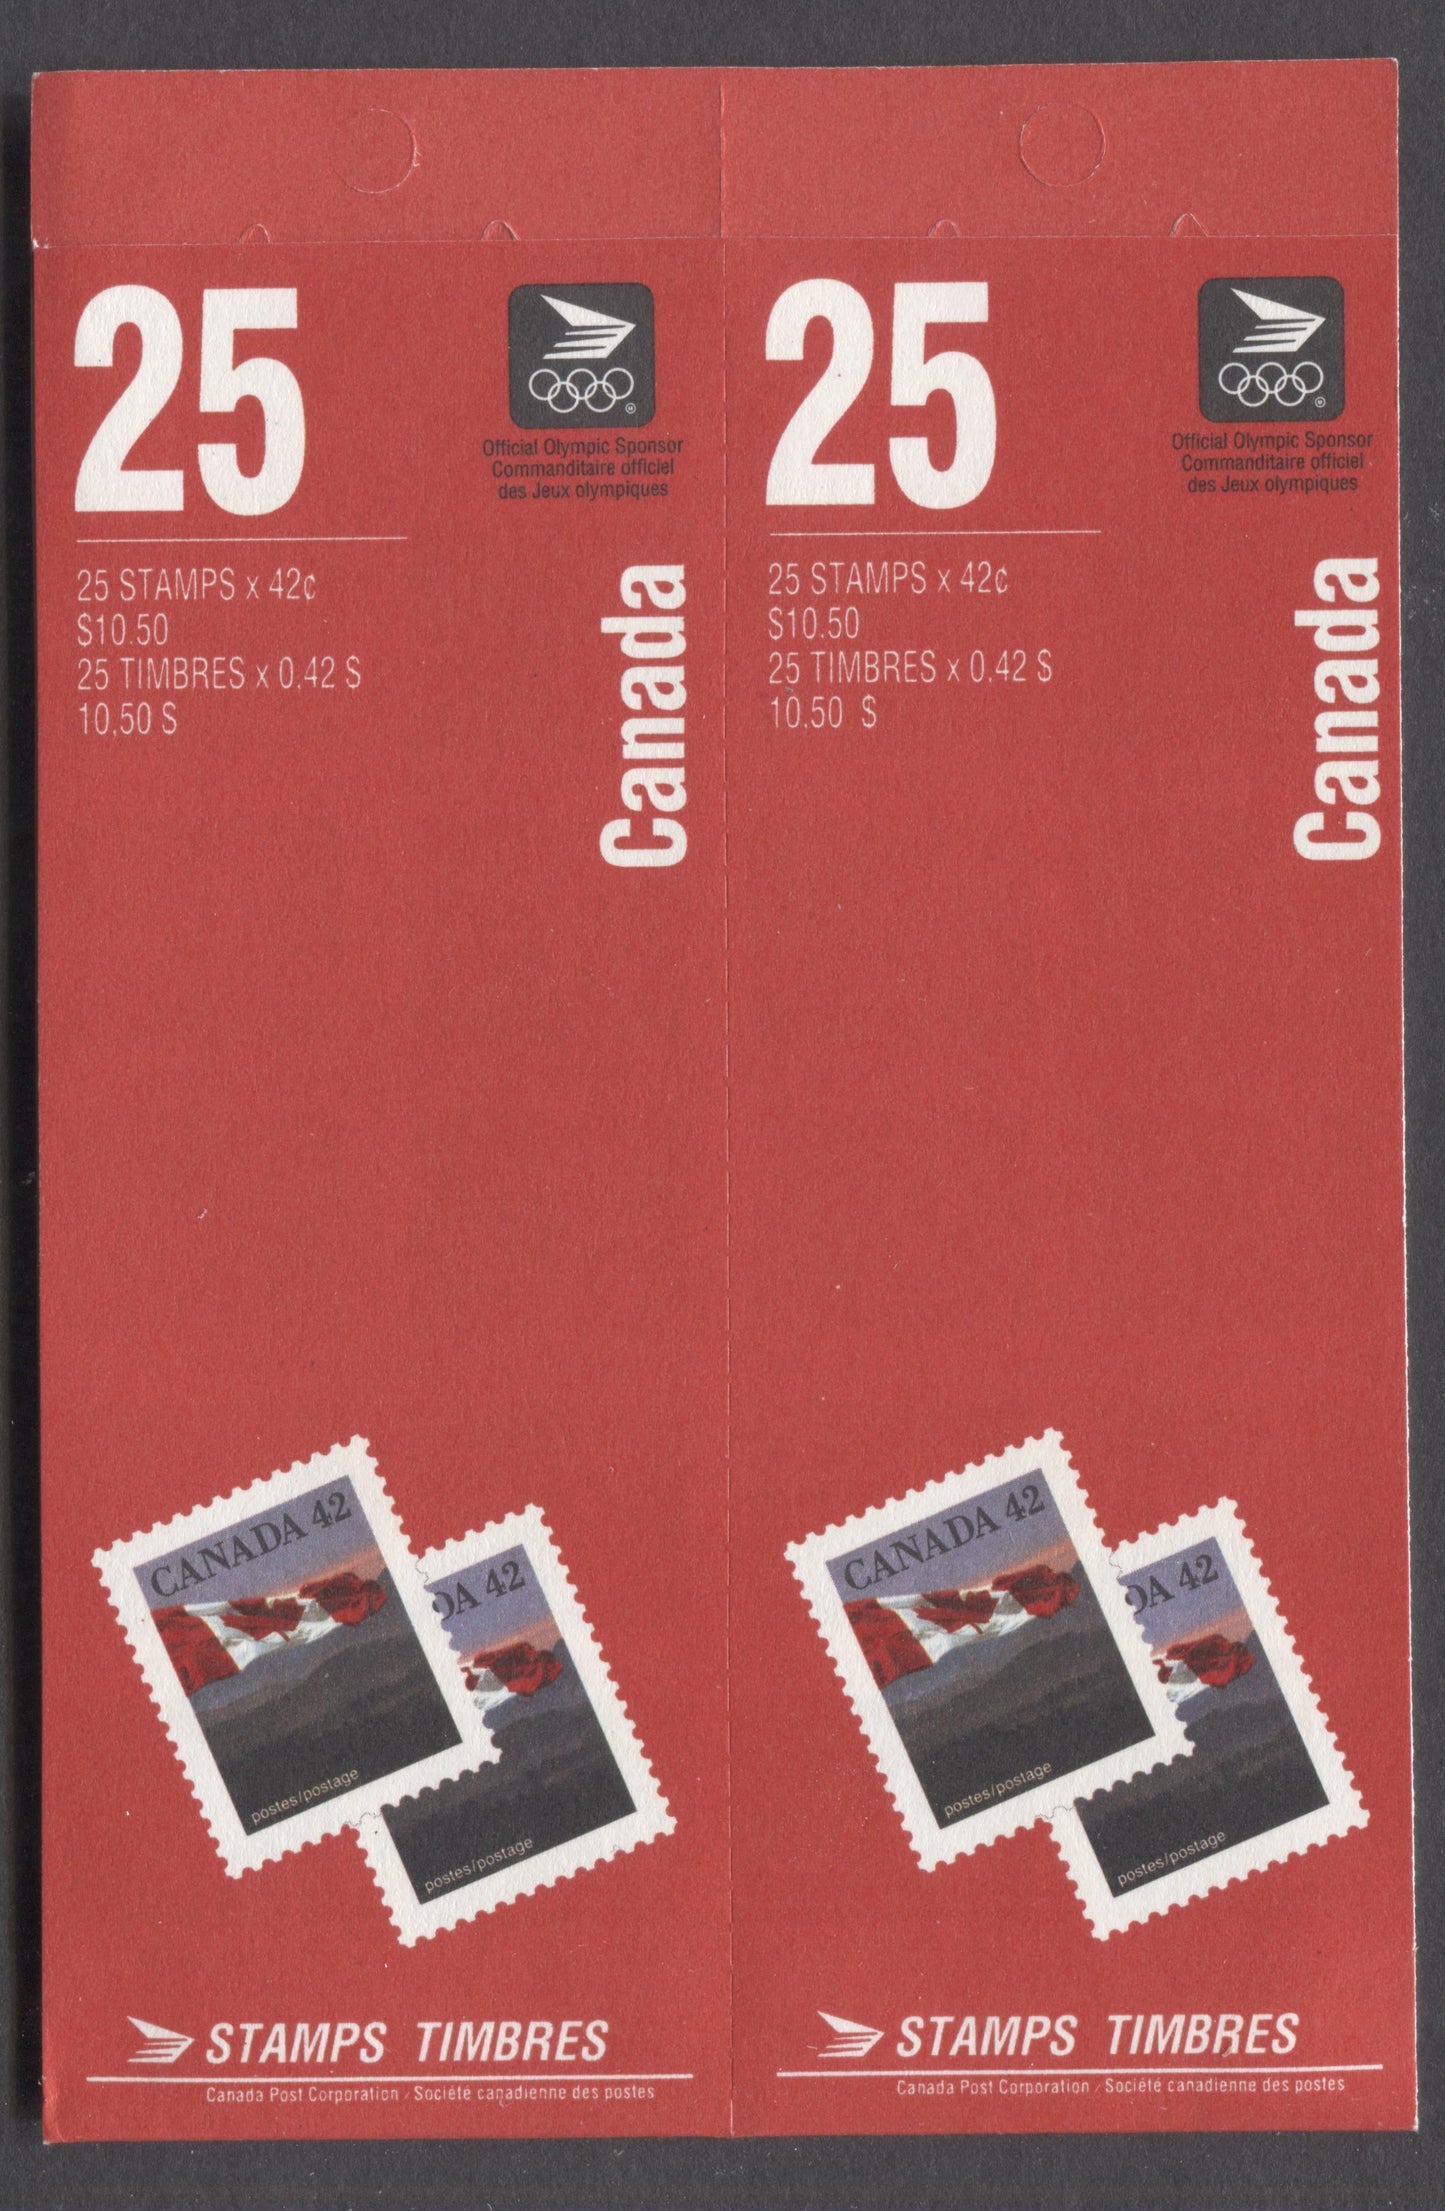 Lot 69 Canada #BK139a 1991-1992 Definitive Issue, A 42c Multicolored Booklet, Sealed, HB Cover Cover Stock, Coated Papers Paper, 4 Stamps' & 'Save $1' Covers, AP Printing, Perf 13.6 x 13.1,   No Tag Bar Along Label Edge At Bottom